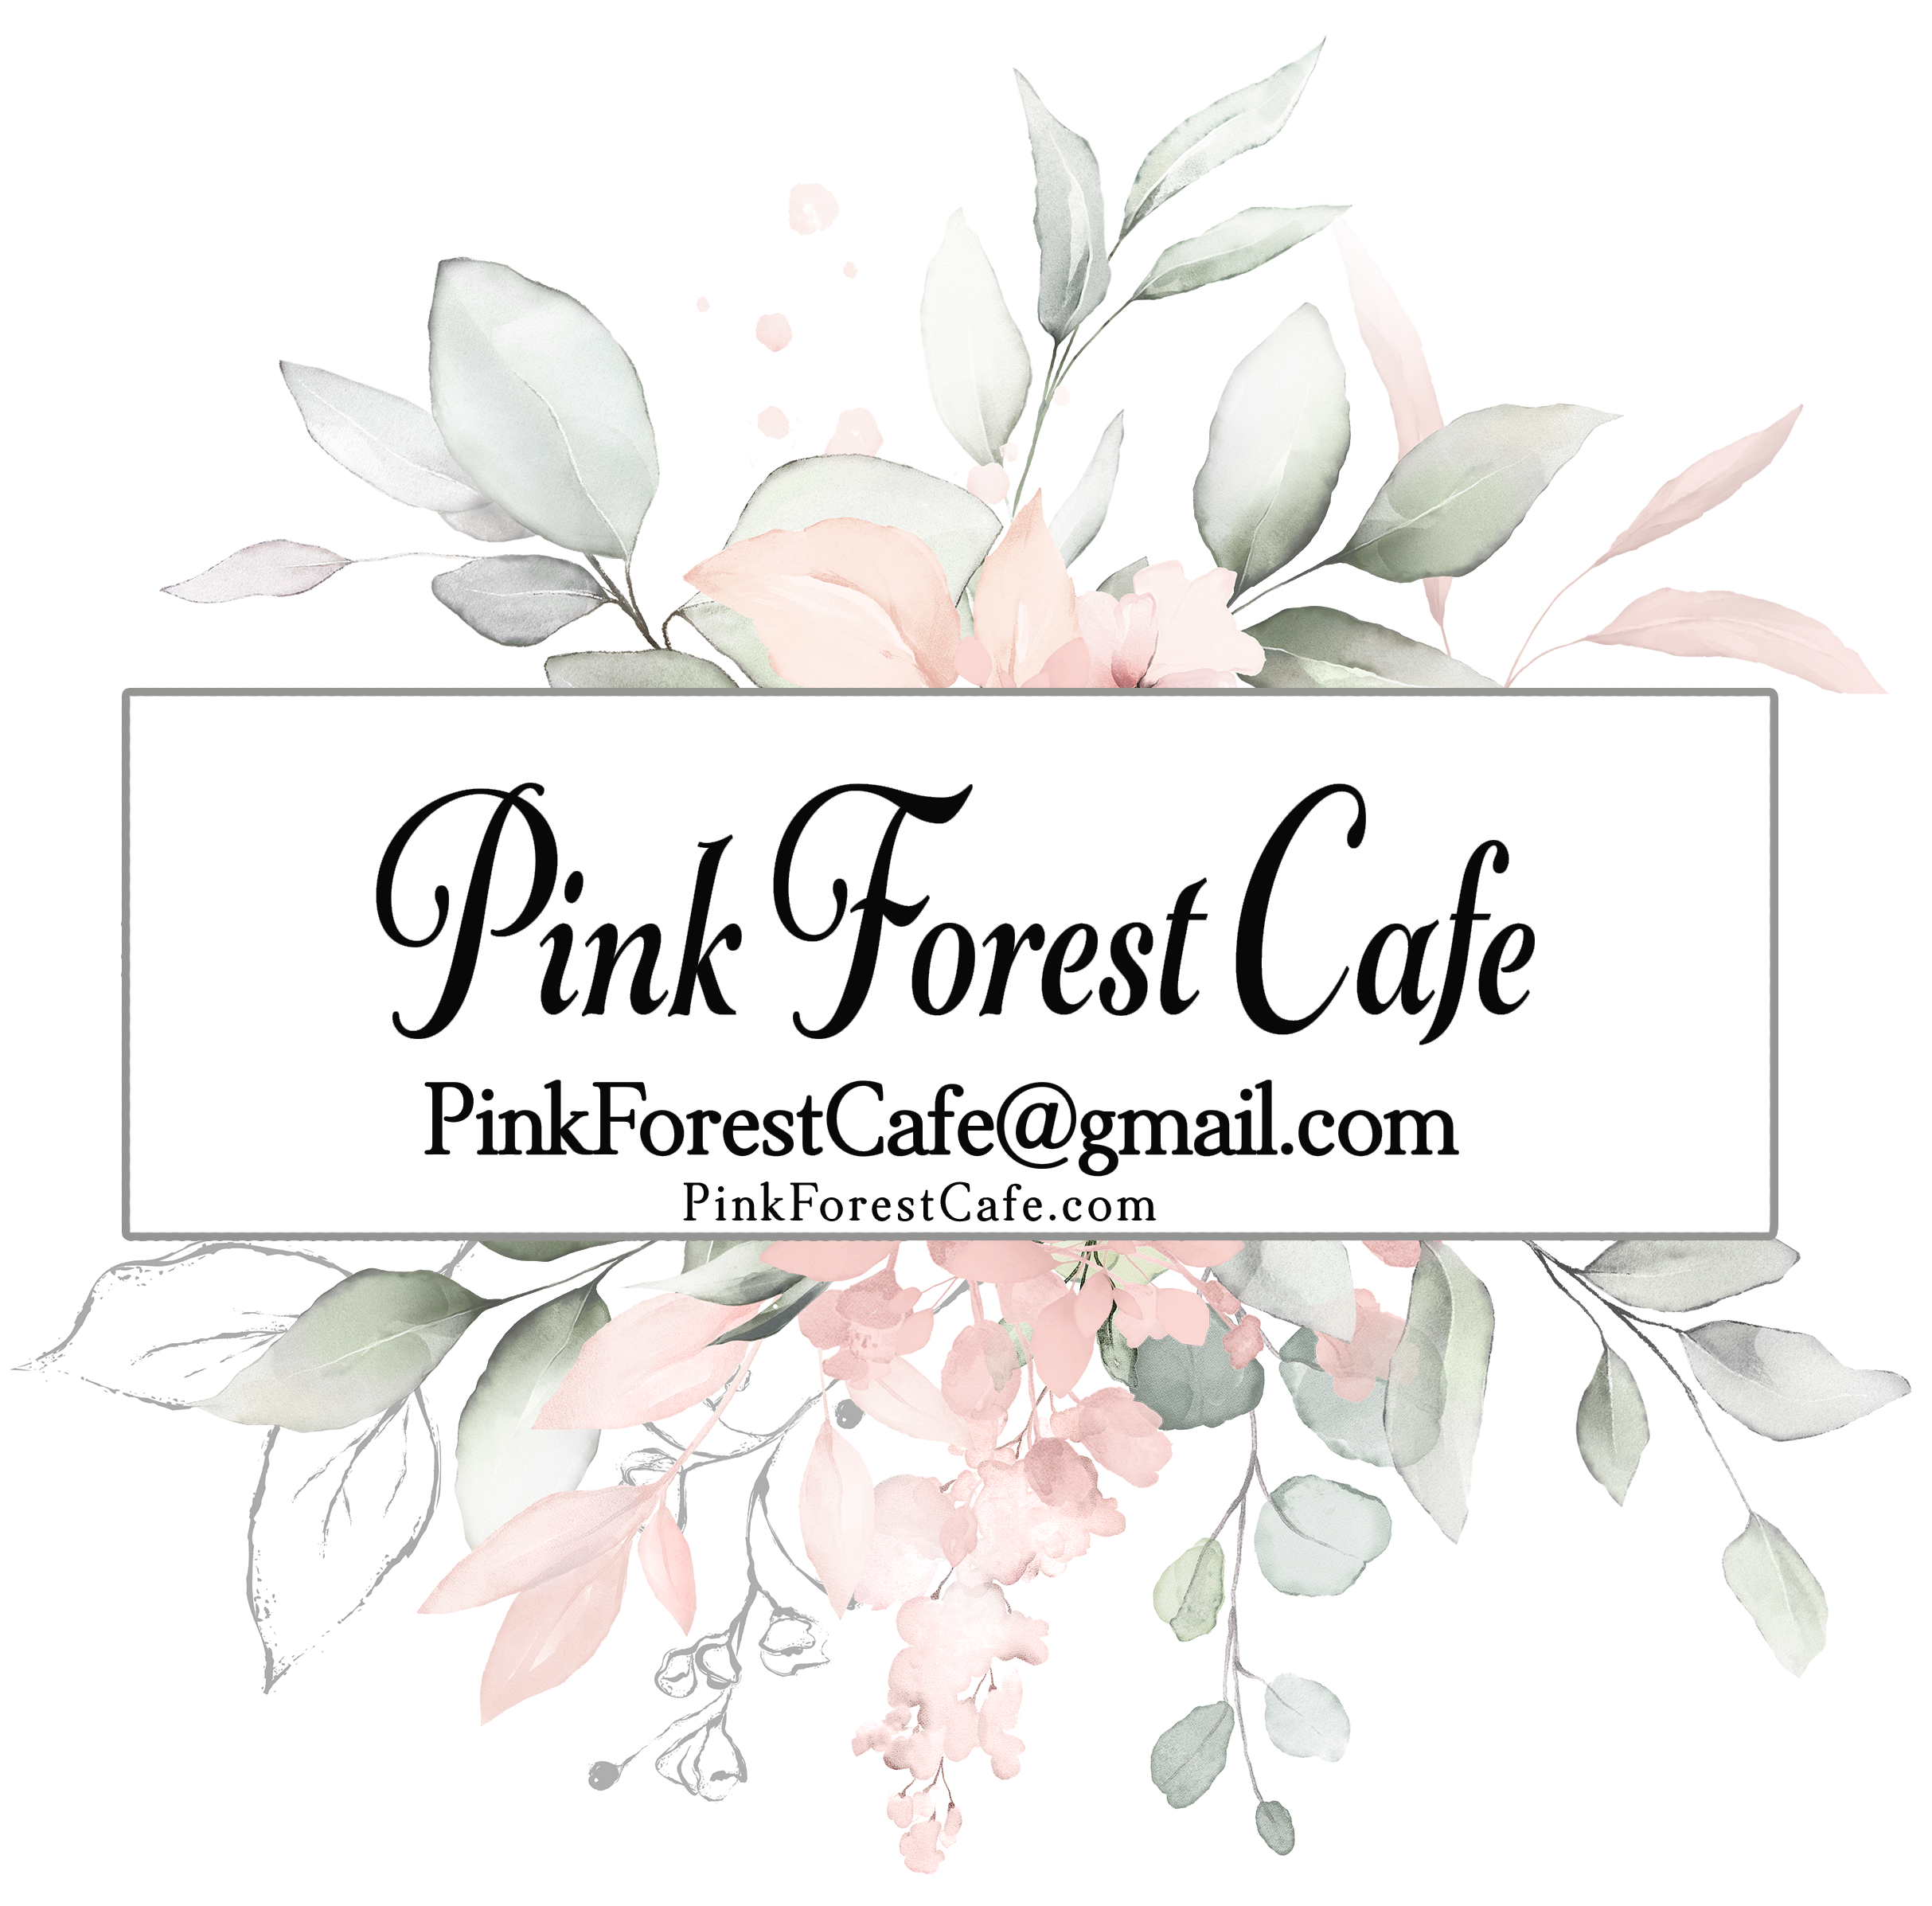 Order My Print - Pink Forest Cafe - 10 (Ten) Prints - 10 Designs Printed and Shipped